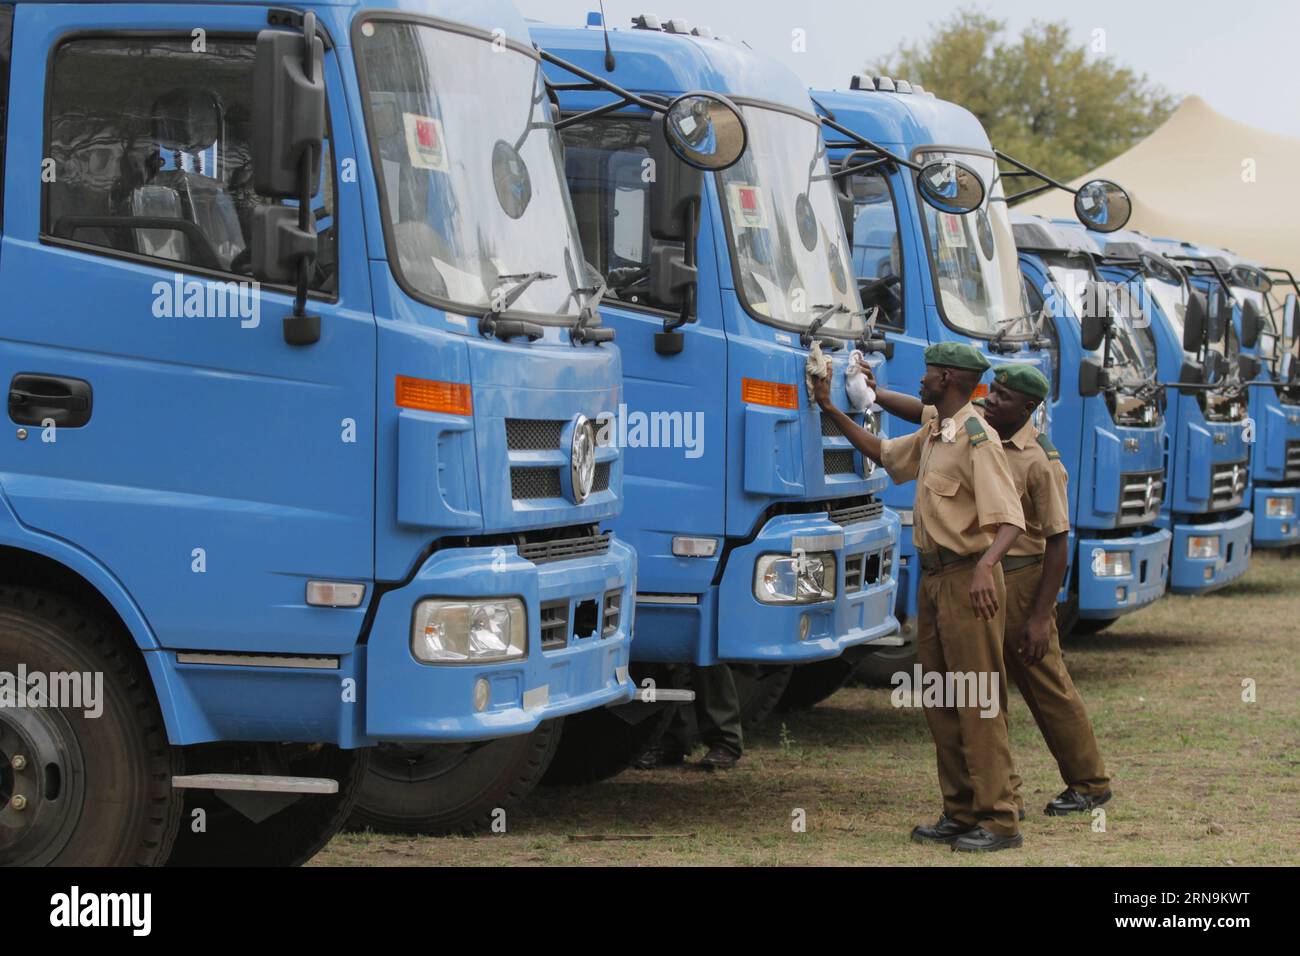 HWANGE, Dec. 10, 2015 -- Officers of Zimbabwe National Parks and Wildlife Management Authority clean vehicles donated by China in Hwange National Park, Zimbabwe, Dec. 10, 2015. China on Thursday handed over vehicles and equipment to Zimbabwe to help the cash-strapped government fight against wildlife poaching, implementing a wildlife protection cooperation agreement signed during Chinese President Xi Jinping s visit to Harare last week. ) (zjy) ZIMBABWE-HWANGE-CHINA-WILDLIFE PROTECTION XuxLingui PUBLICATIONxNOTxINxCHN   Hwange DEC 10 2015 Officers of Zimbabwe National Parks and Wildlife Manage Stock Photo